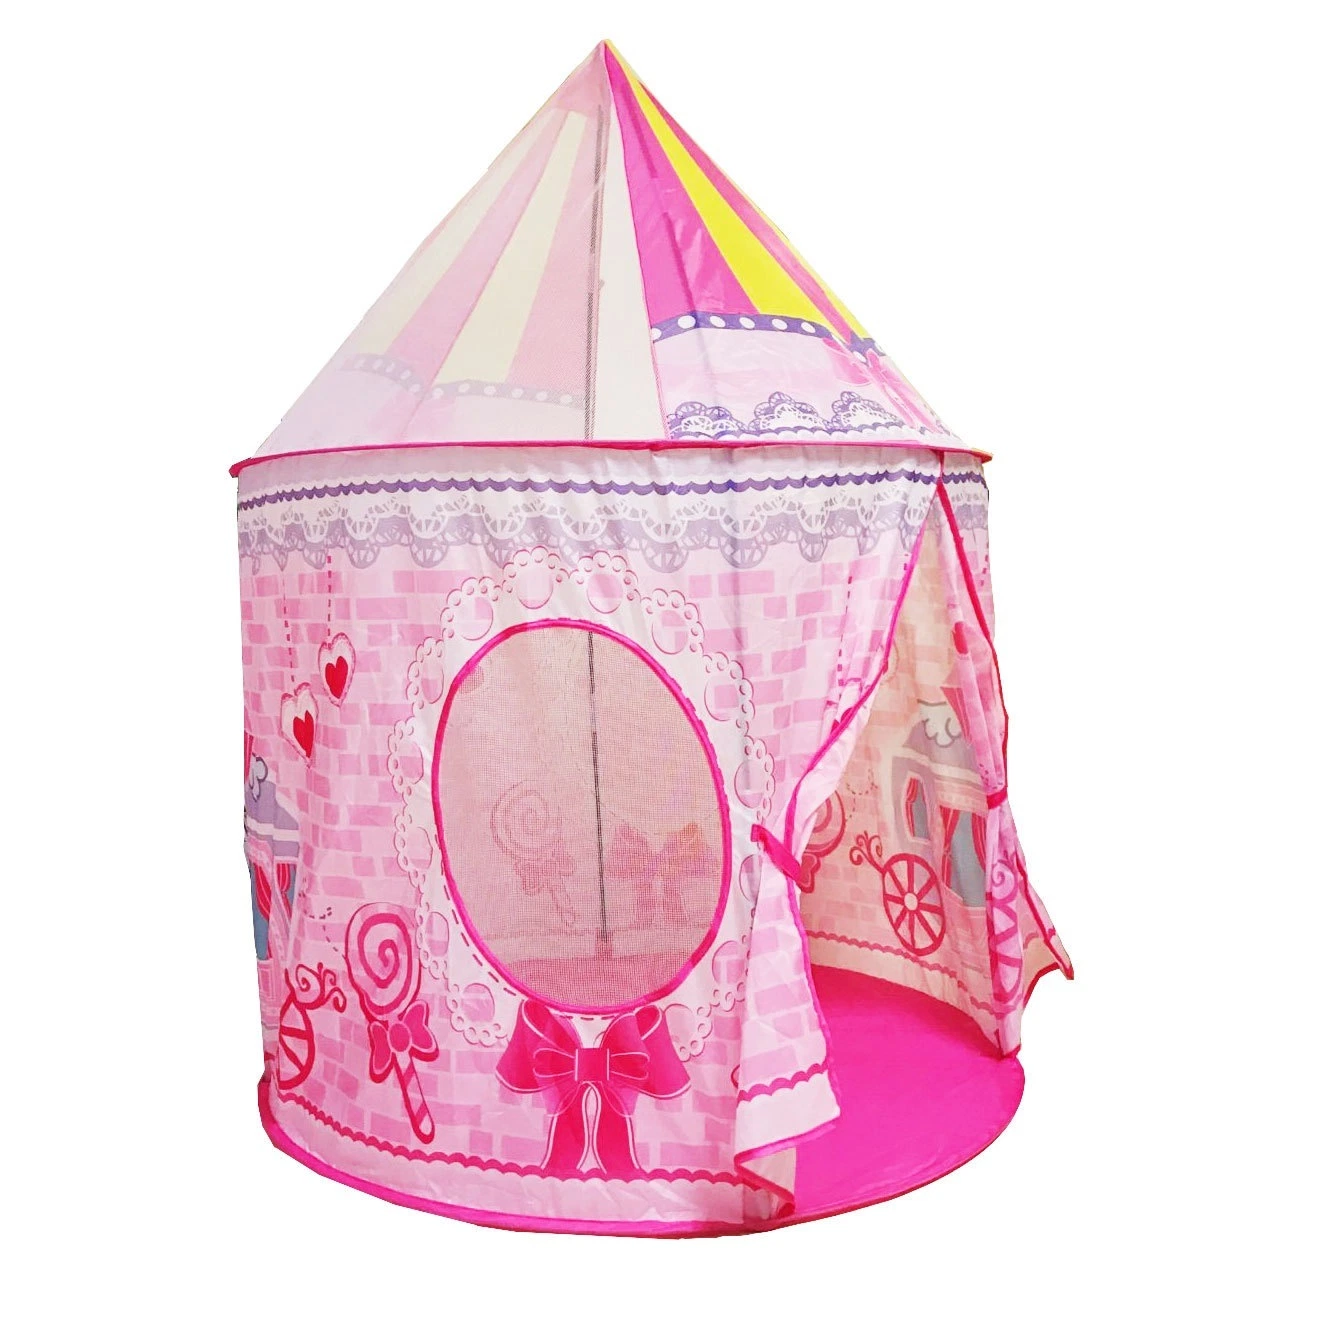 Kiddie Princess Wagon Tent Collapsible Children Tent Pop up Round Game Room Wbb16356